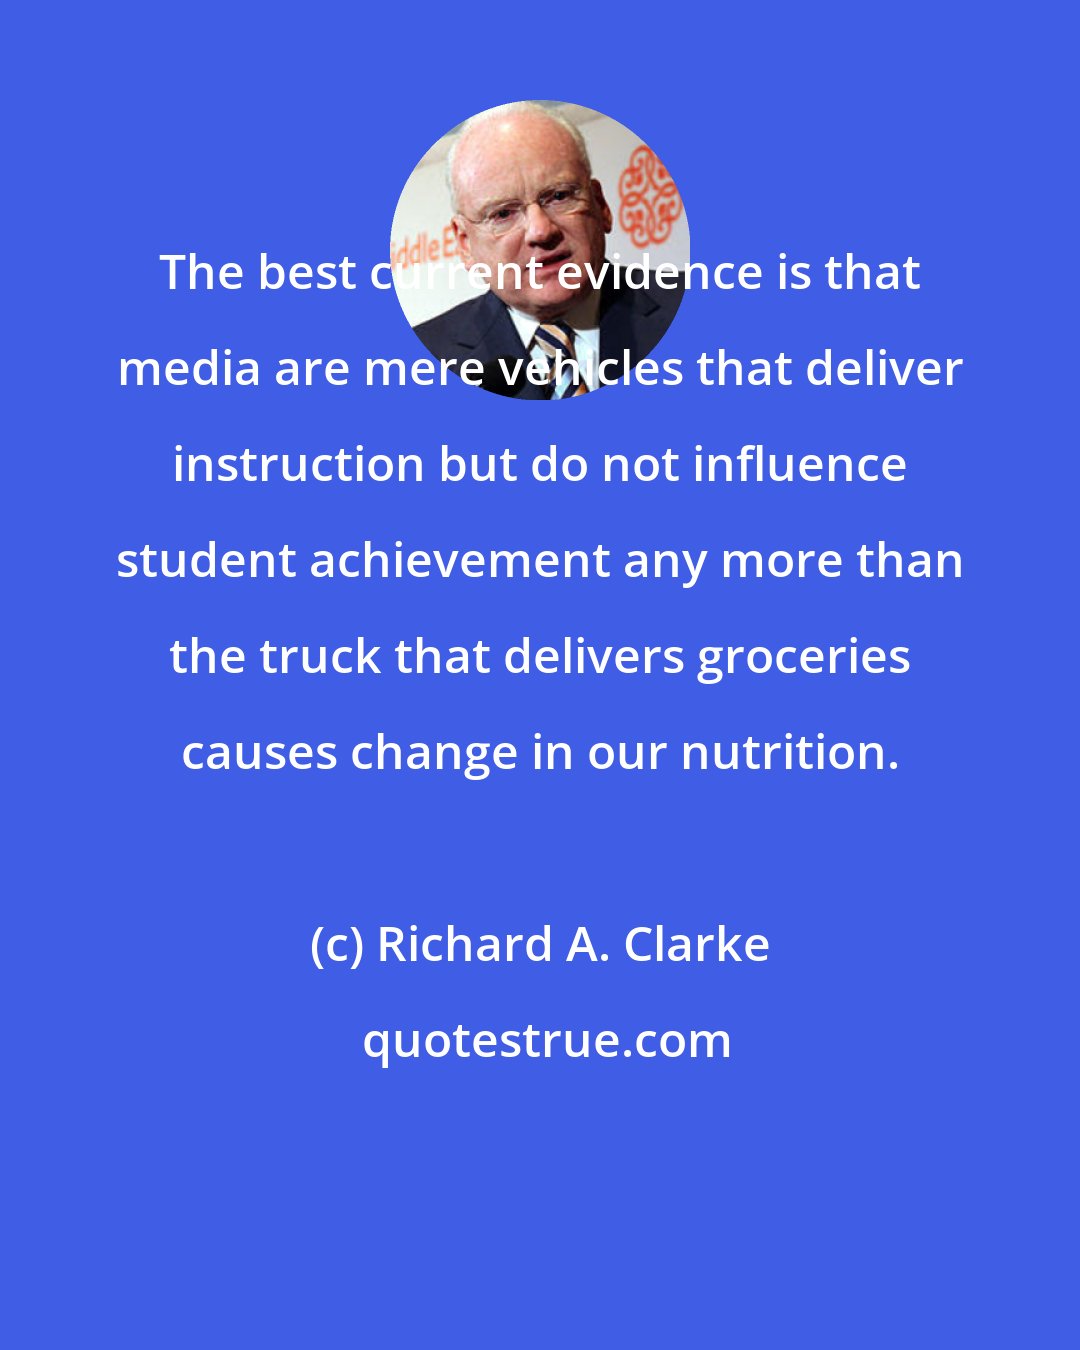 Richard A. Clarke: The best current evidence is that media are mere vehicles that deliver instruction but do not influence student achievement any more than the truck that delivers groceries causes change in our nutrition.